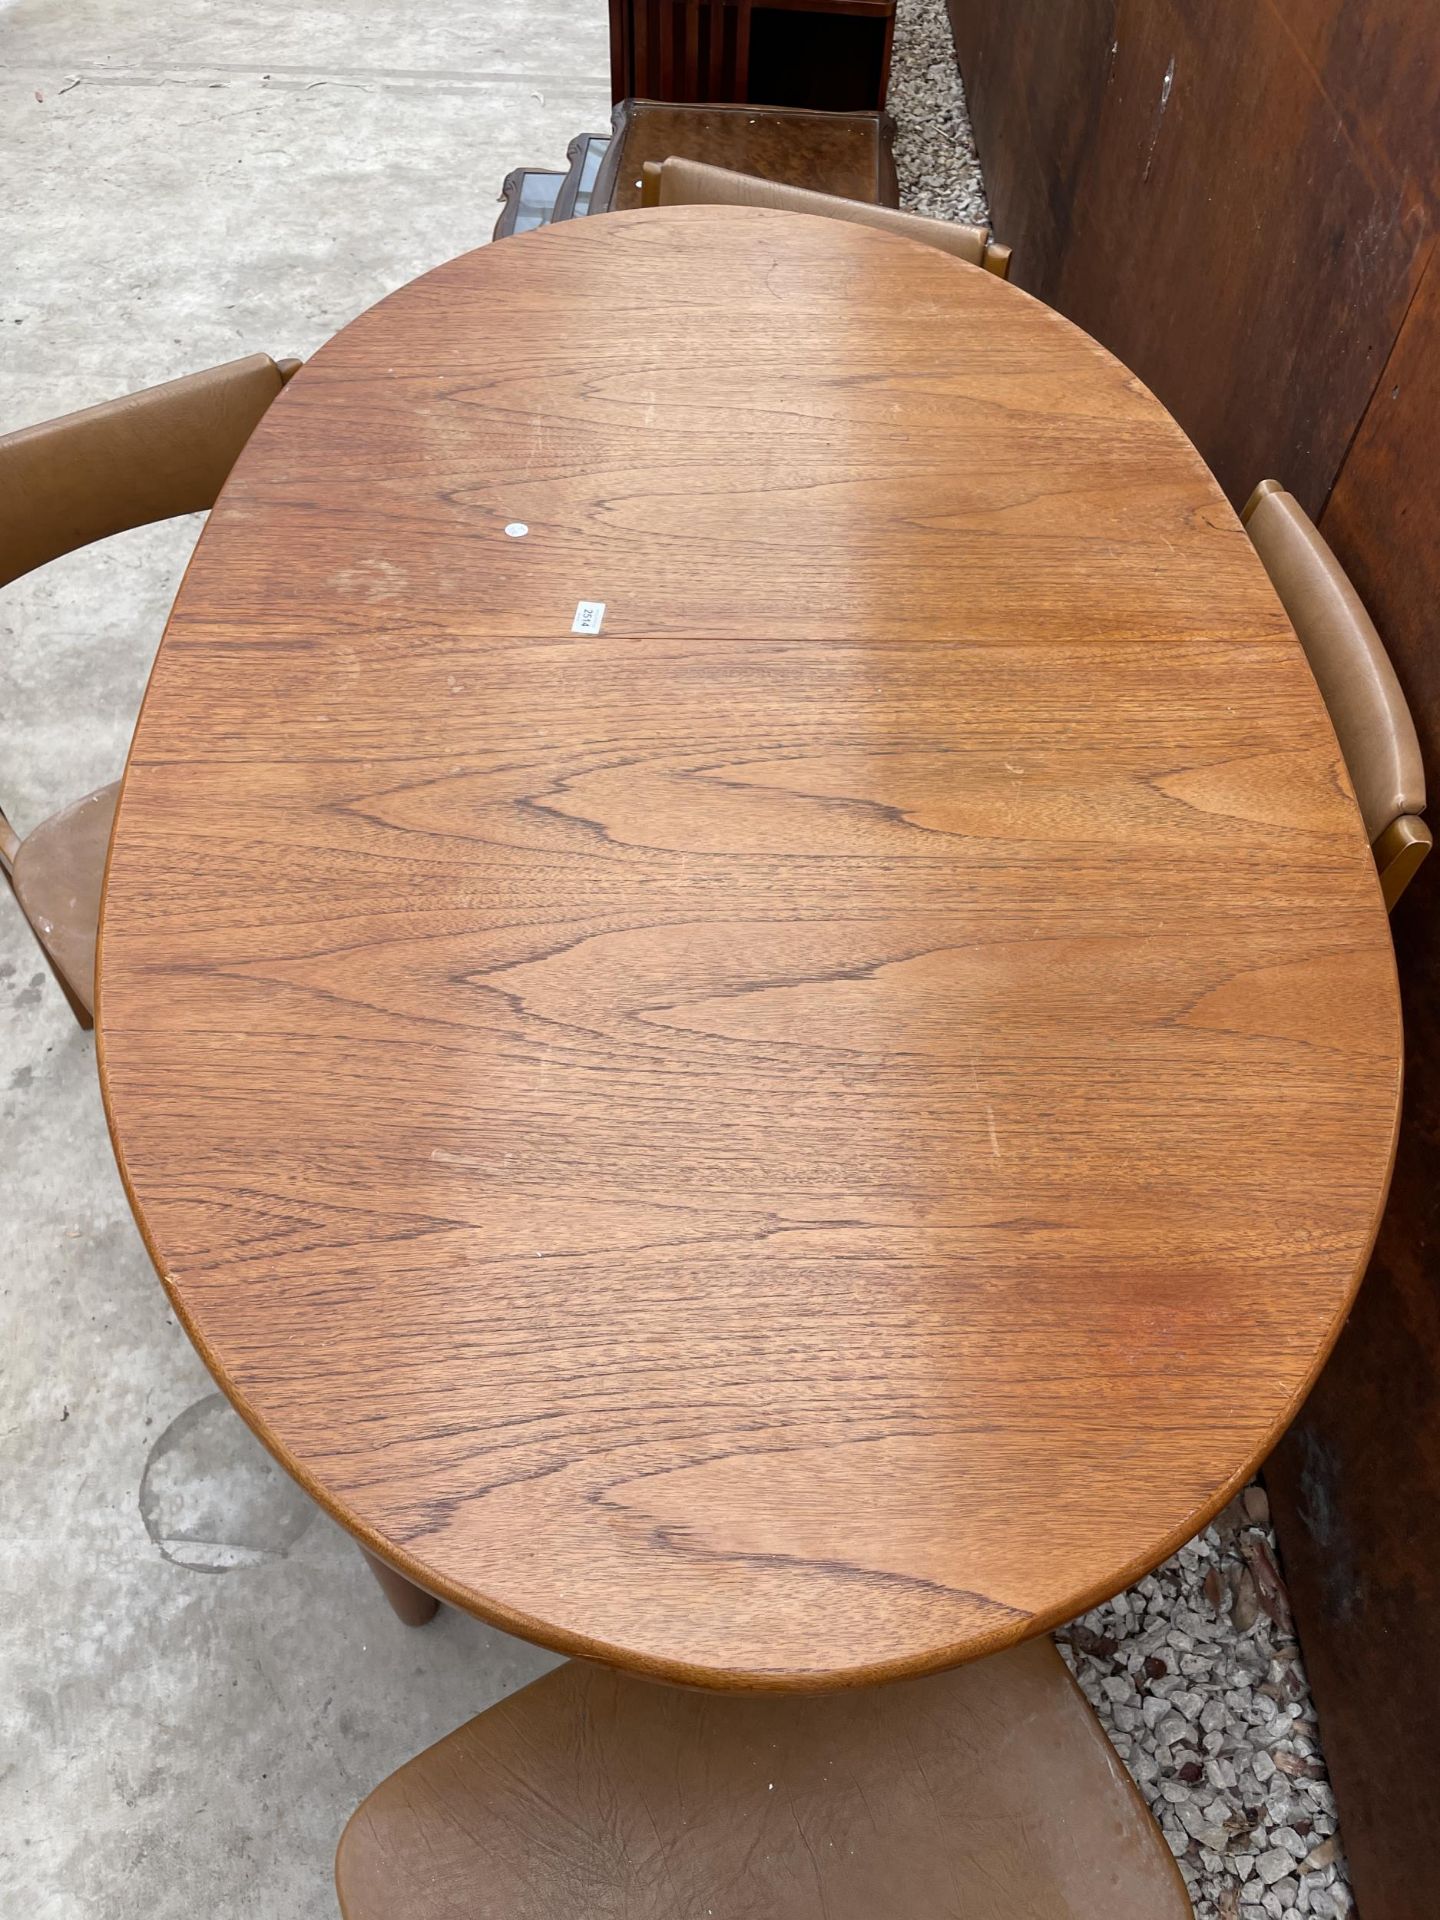 AN OVAL RETRO TEAK EXTENDING DINING TABLE, 60 X 36" (LEAF 18") AND FOUR CHAIRS - Image 6 of 6